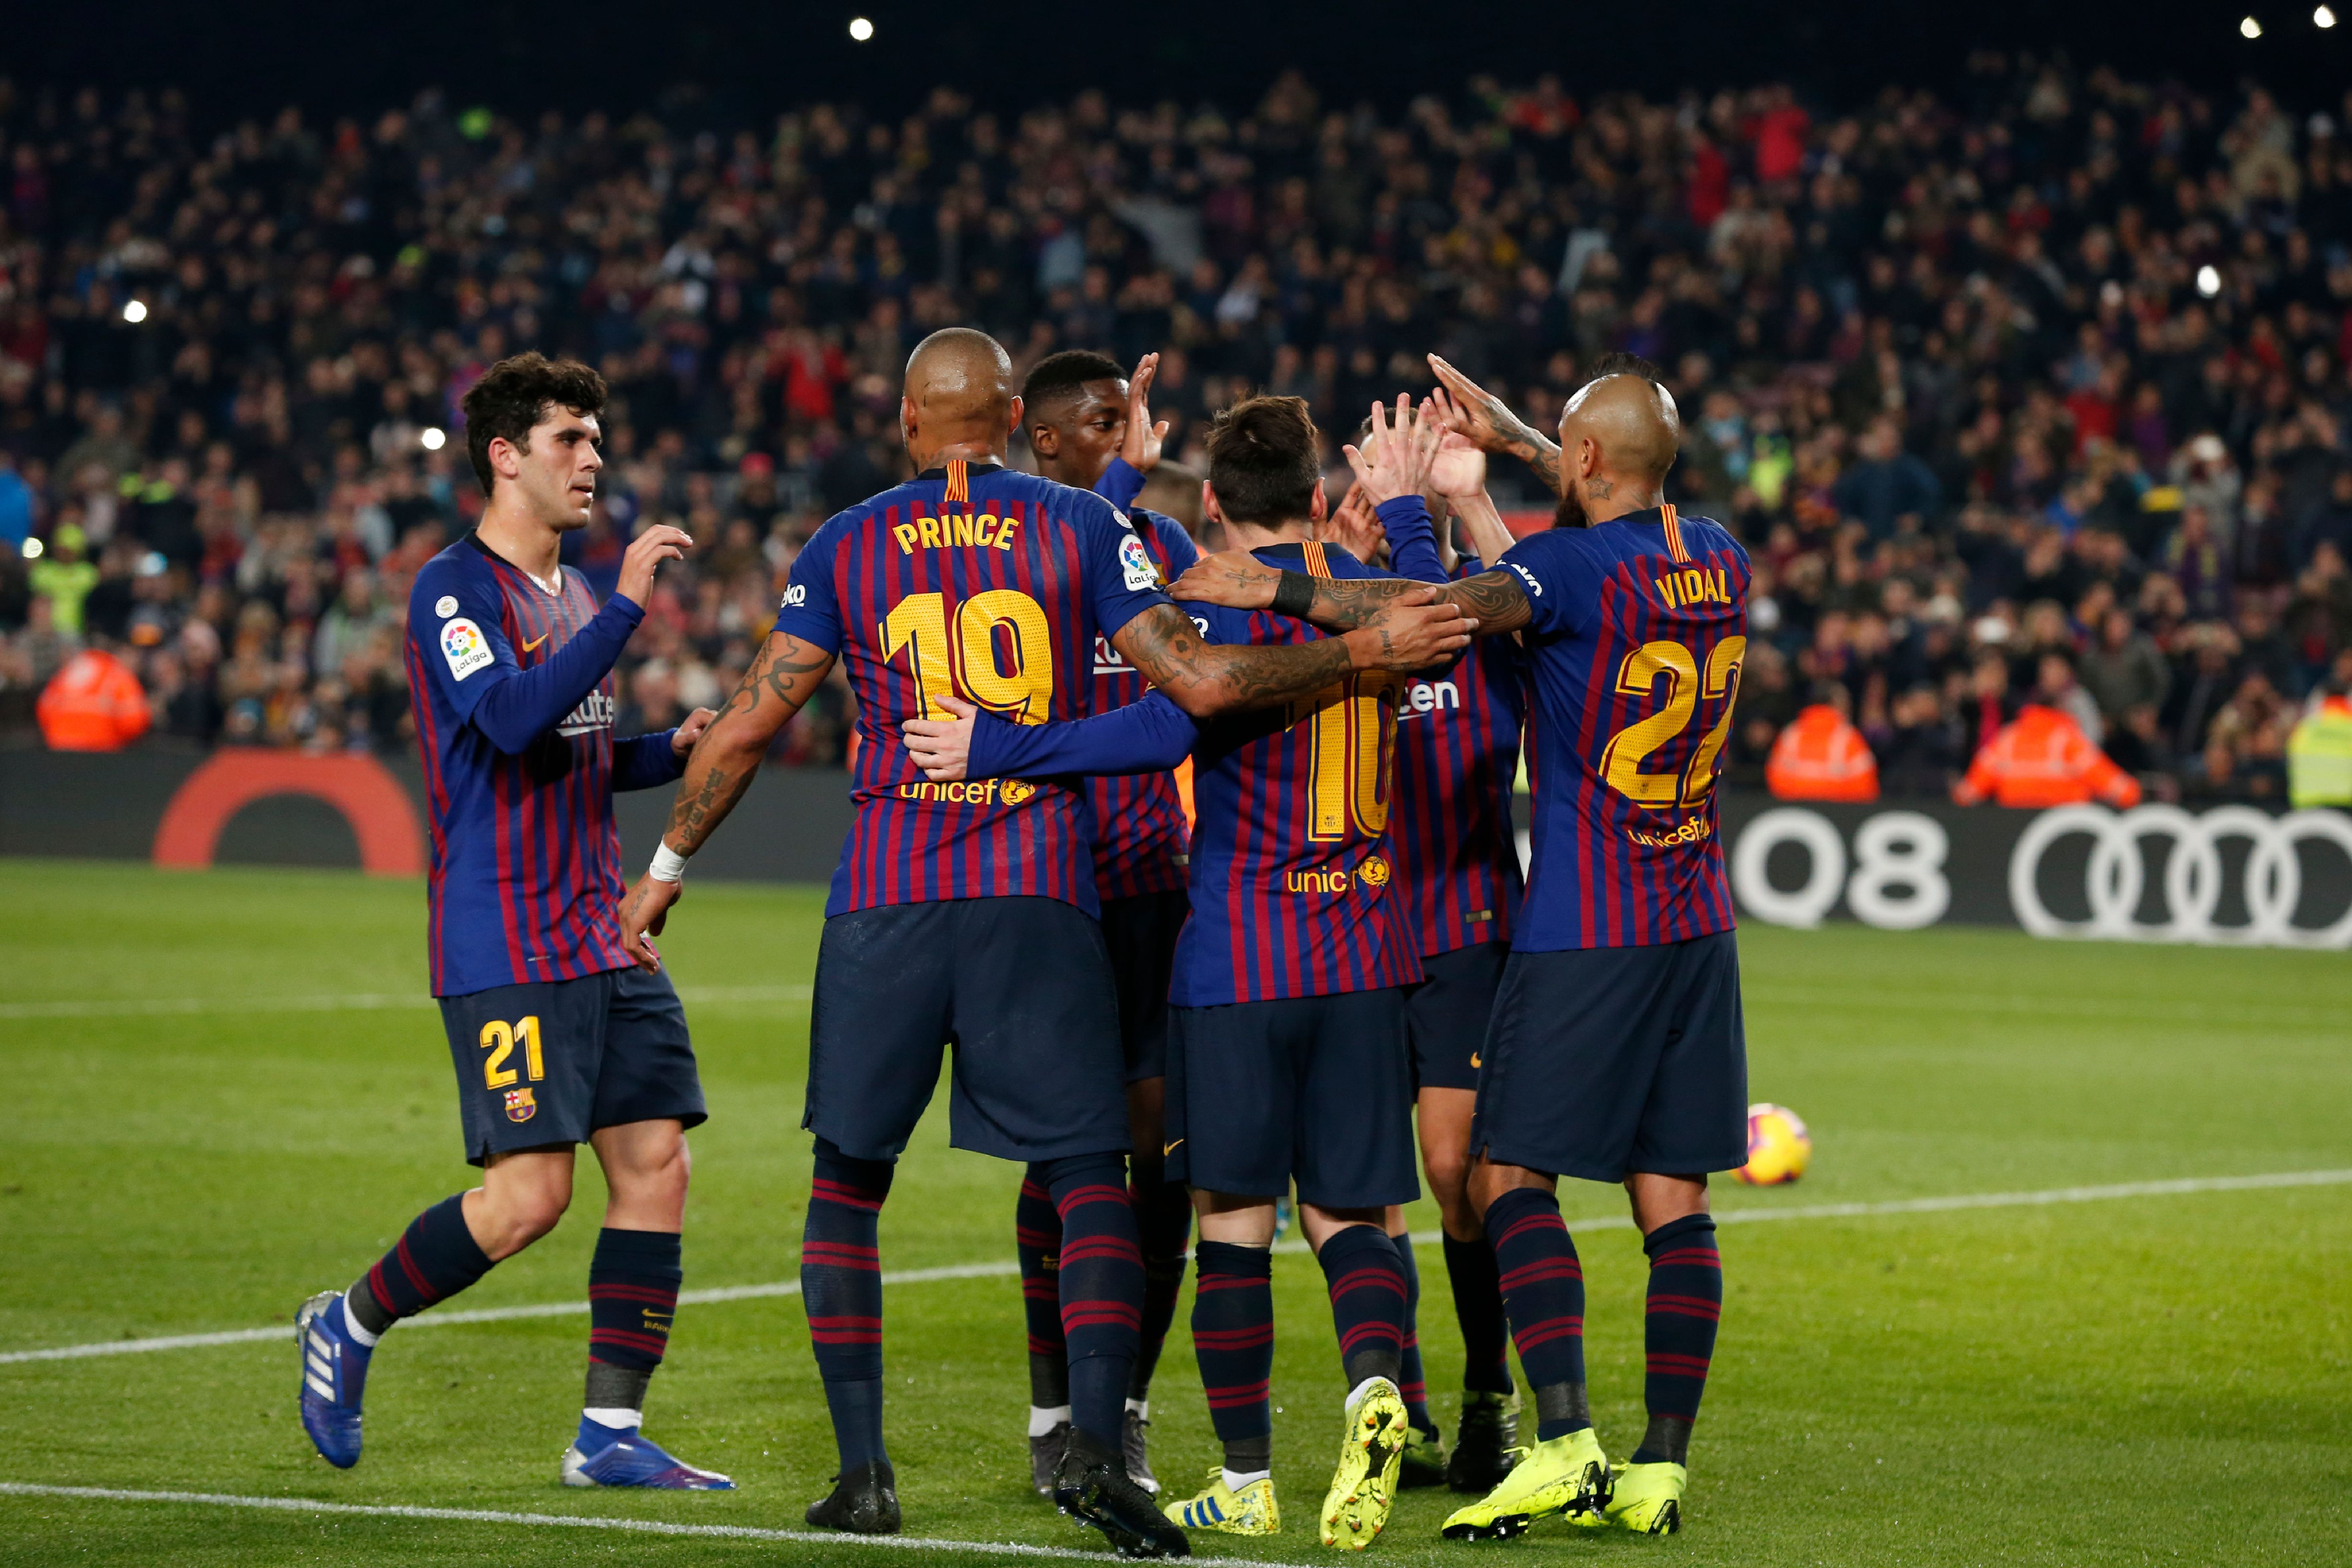 Barcelona's Argentinian forward Lionel Messi (2R) celebrates with teammates after scoring a goal during the Spanish League football match between Barcelona and Real Valladolid at the Camp Nou stadium in Barcelona on February 16, 2019. (Photo by Pau Barrena / AFP)        (Photo credit should read PAU BARRENA/AFP/Getty Images)